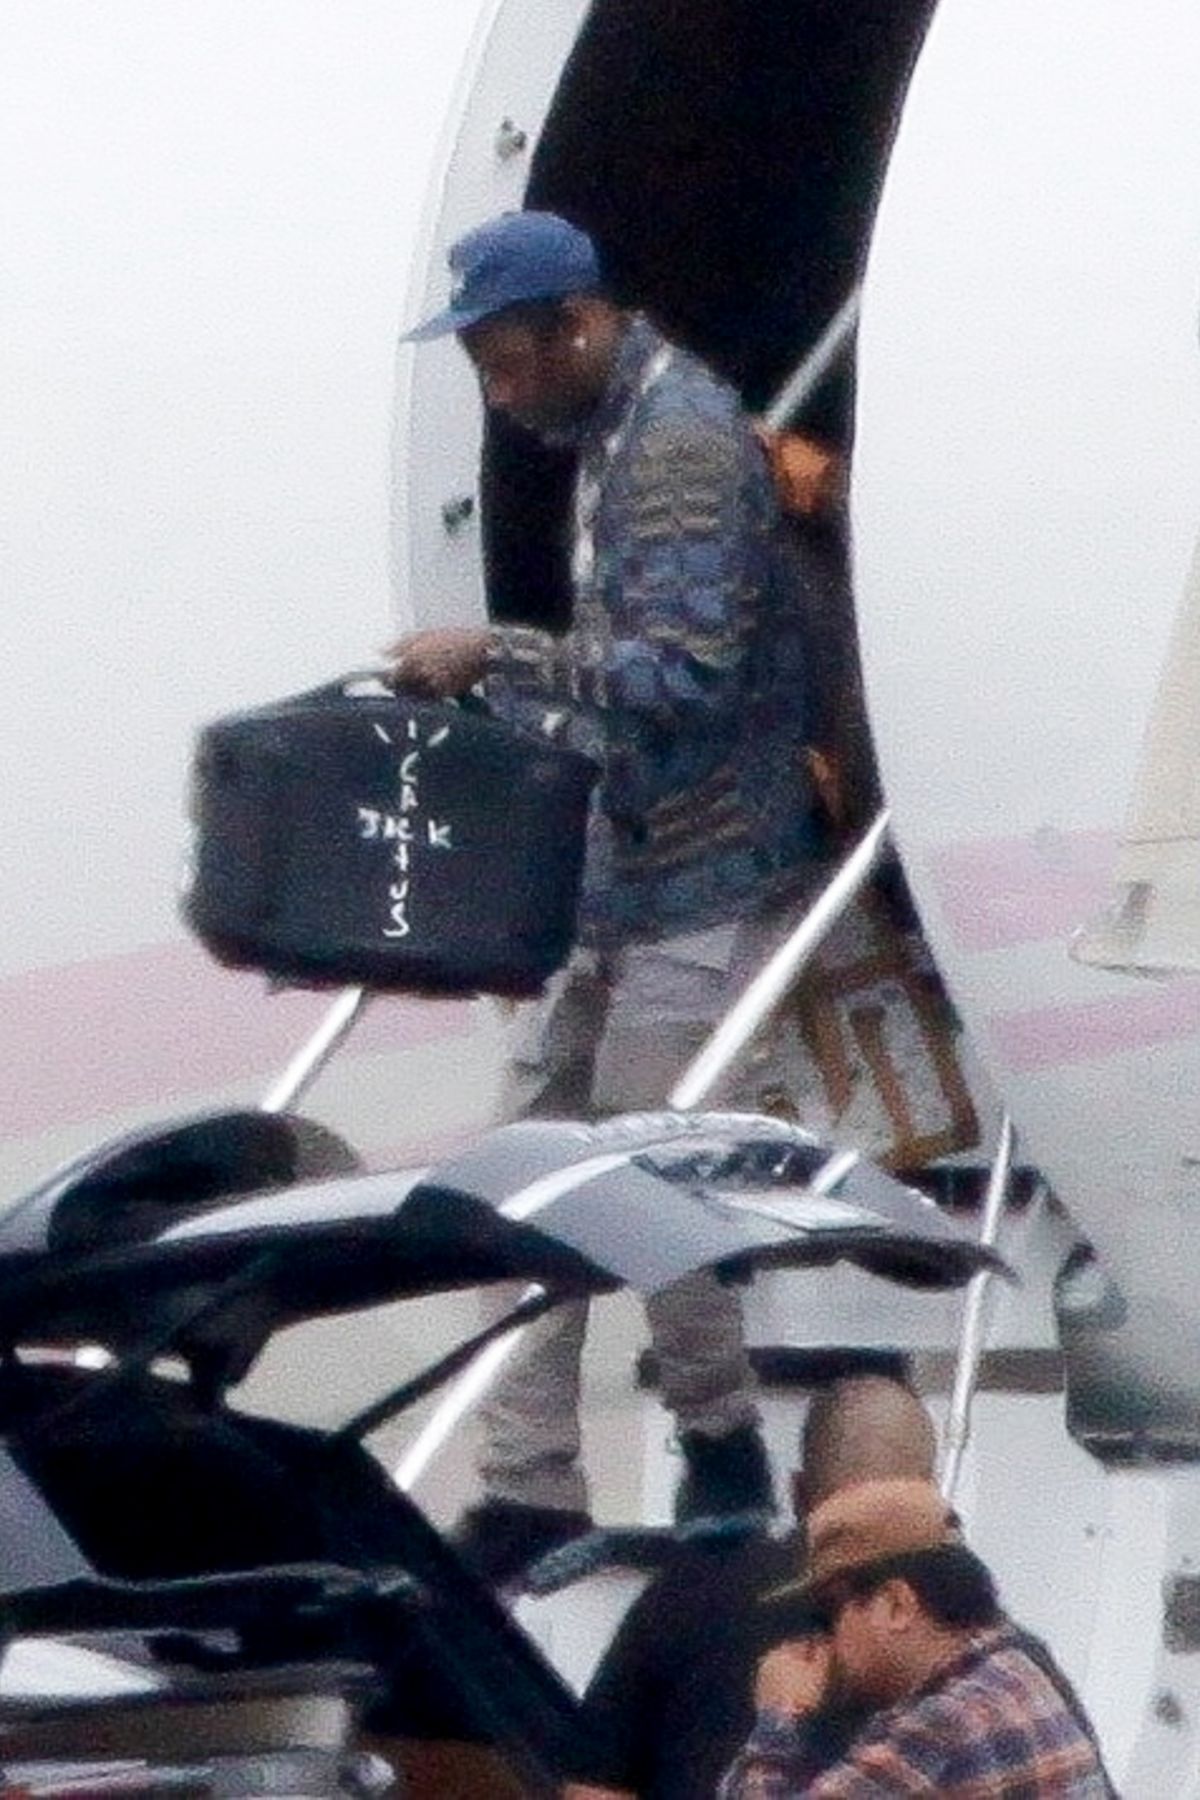 Kylie Jenner and Travis Scott at Airport in Los Angeles 2020/10/26